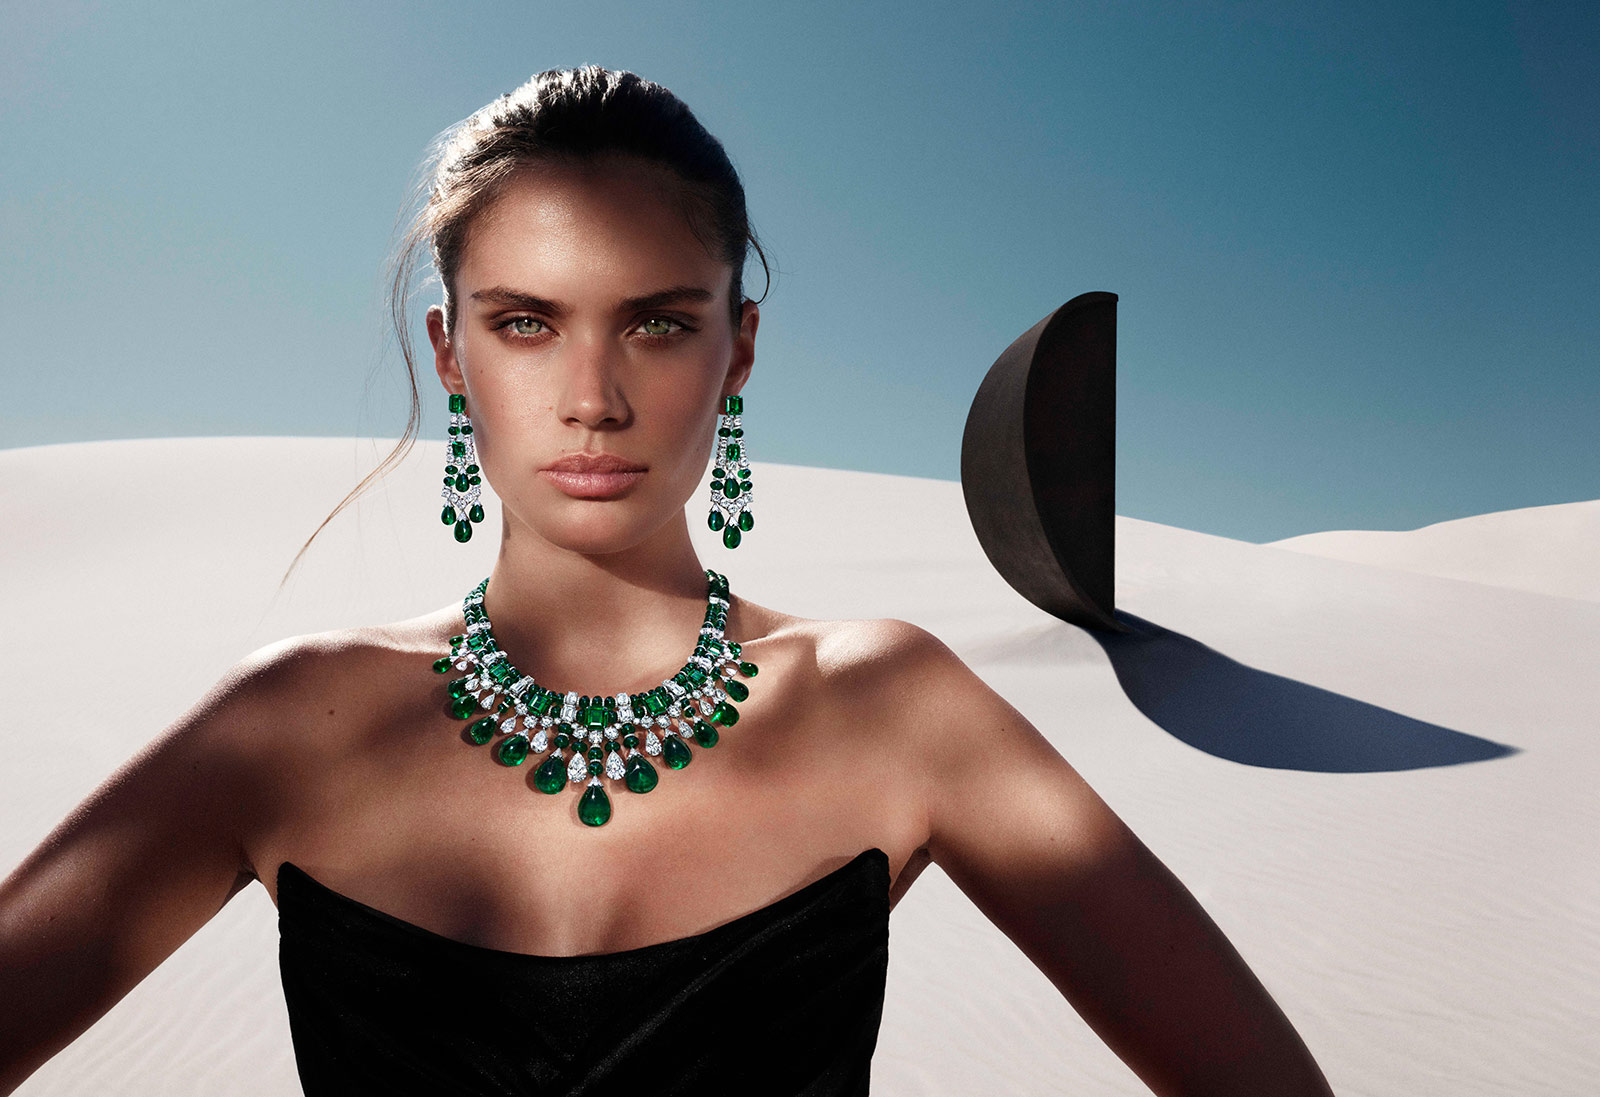 Pieces from the Graff Tribal High Jewellery Collection, including a pair of earrings with 60 carats of emeralds and 9 carats of diamonds and a matching necklace with 418 carats of emeralds and 76 carats of diamonds 